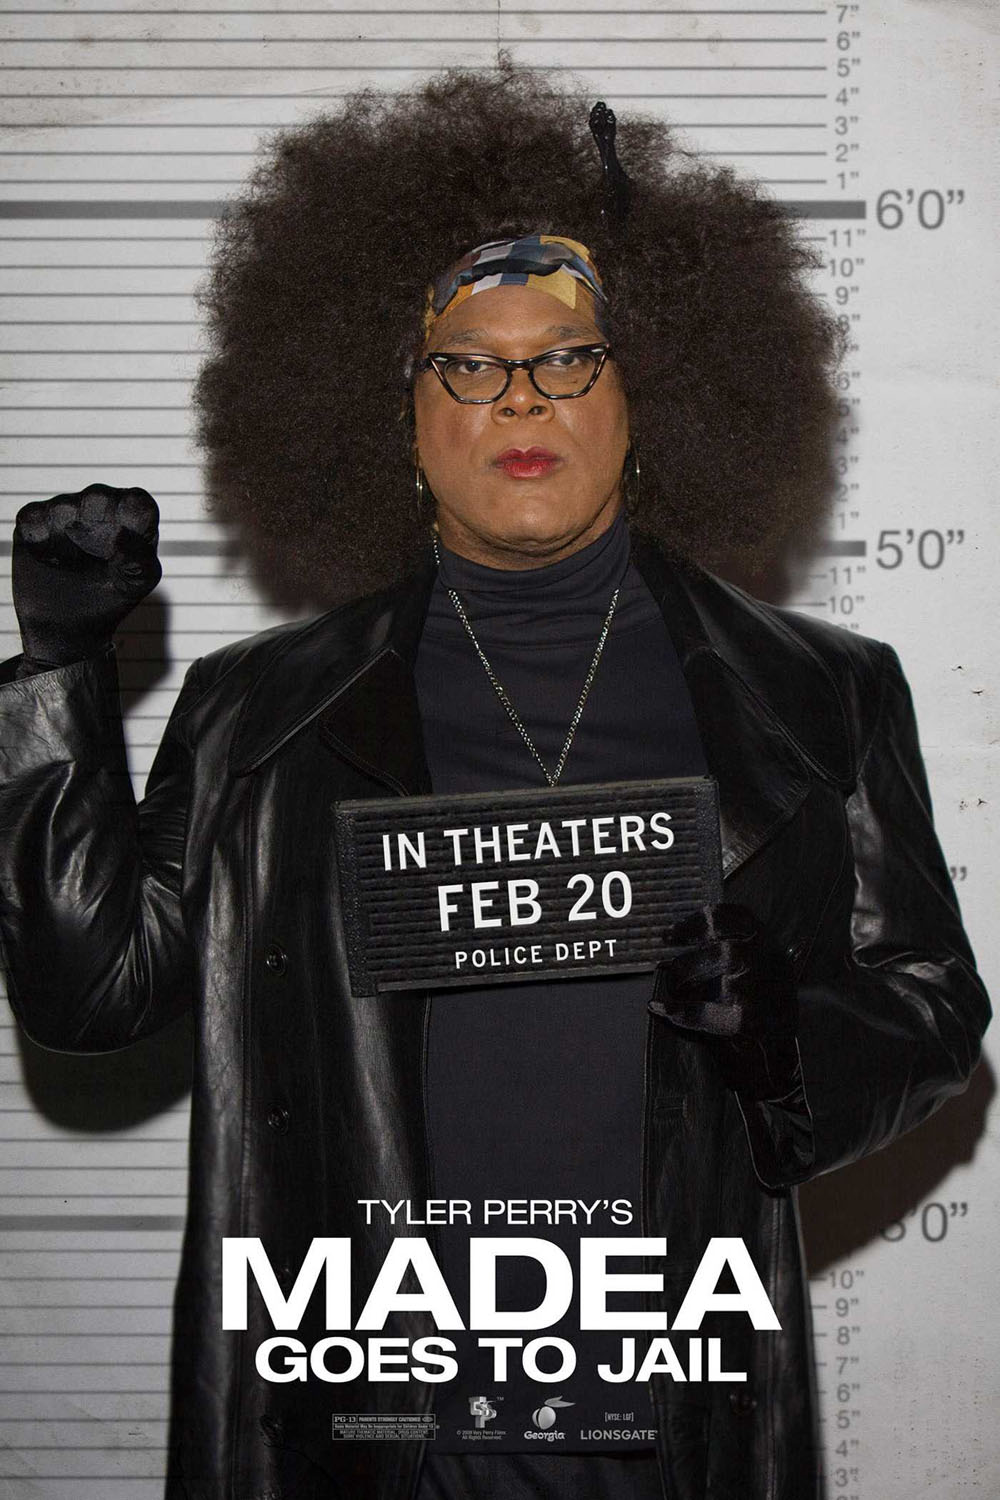 Madea+goes+to+jail+play+script